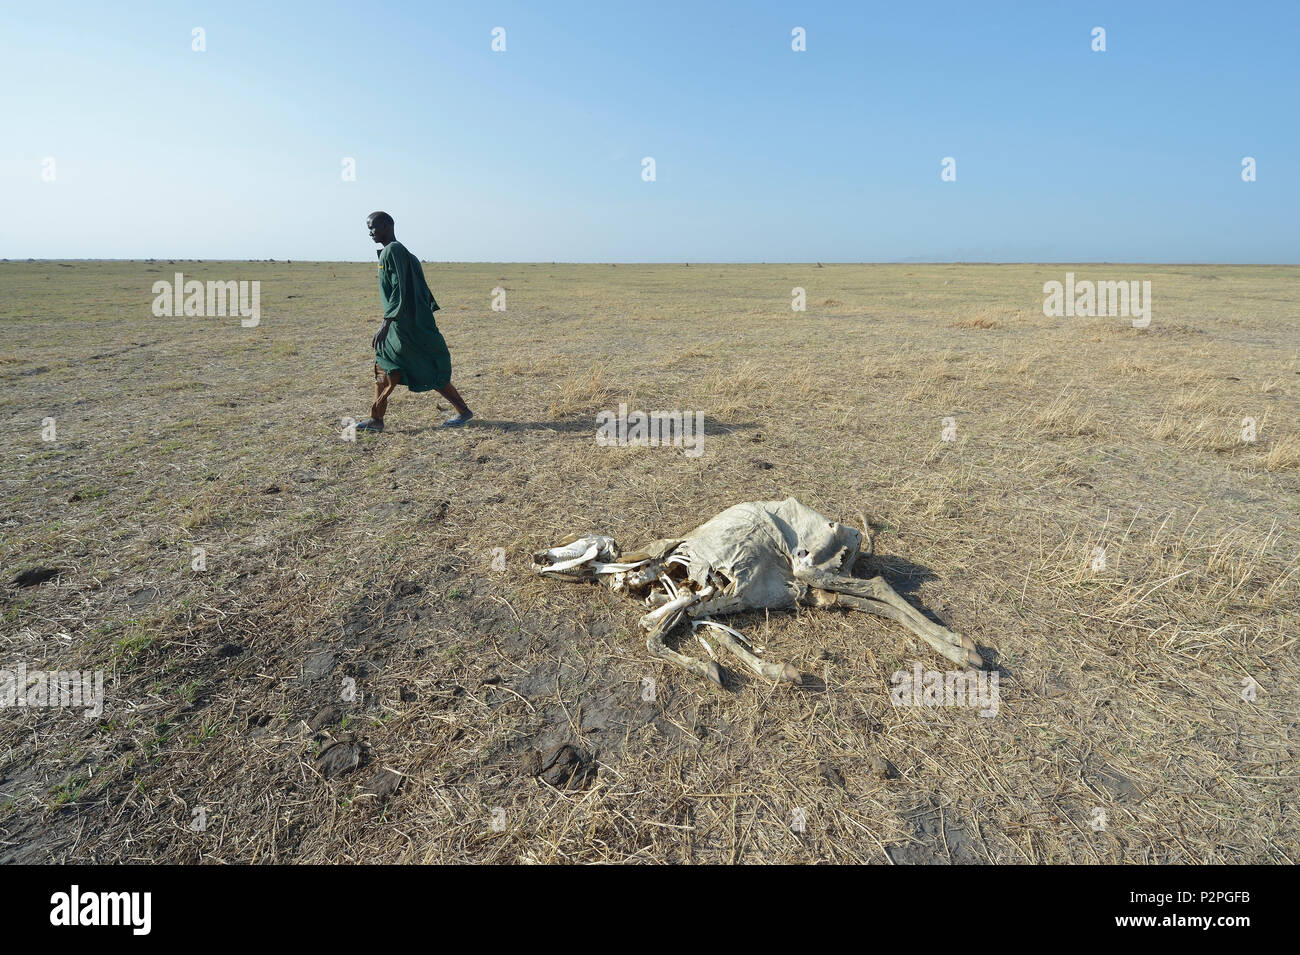 A man walks by a dead cow in Dong Boma, a Dinka village in South Sudan's Jonglei State, on April 12, 2017. Stock Photo